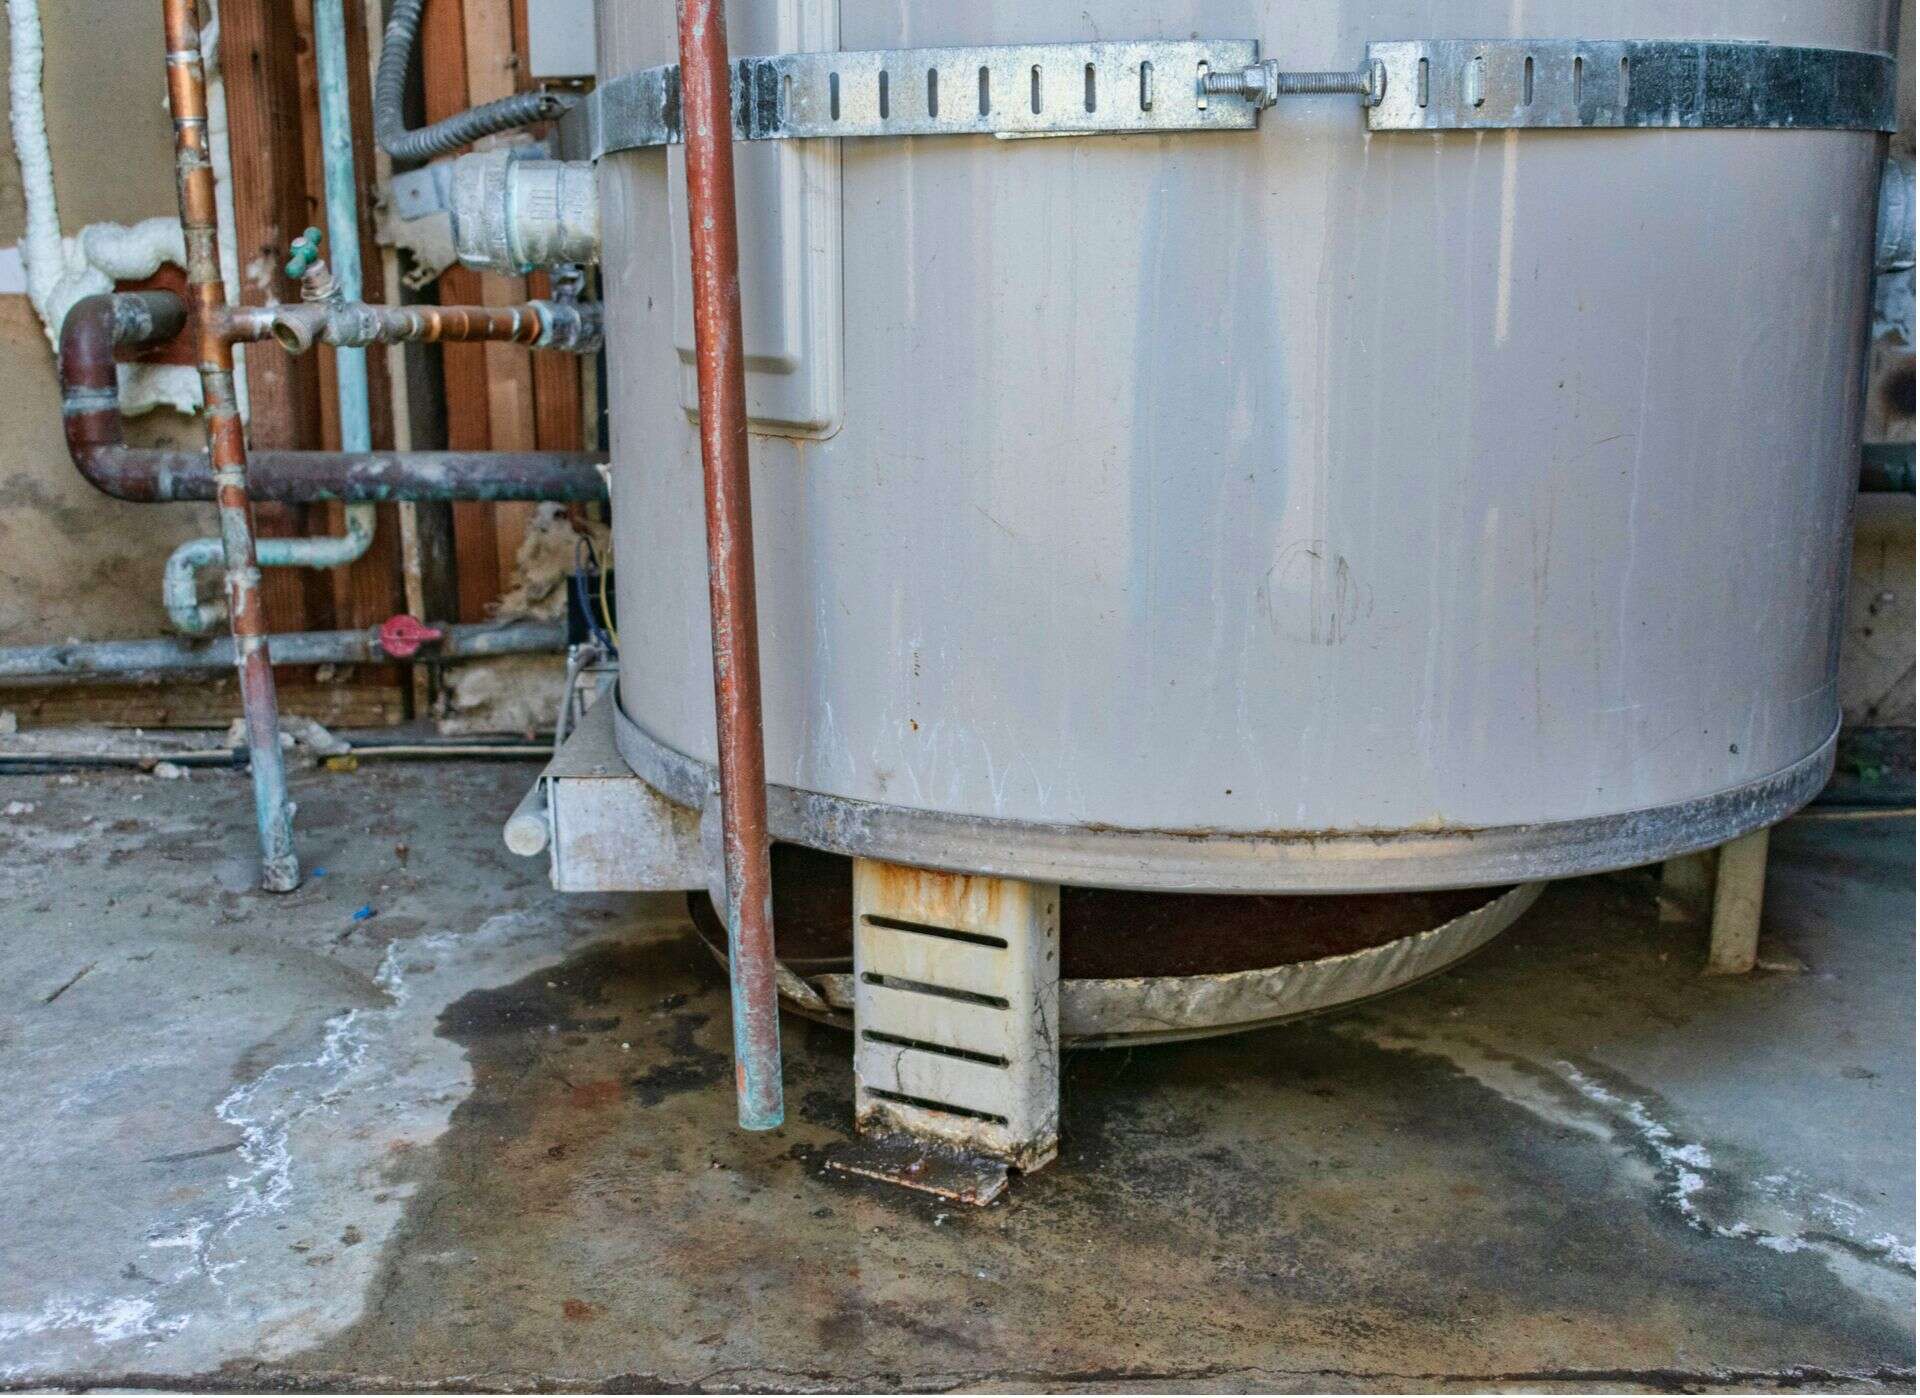 How To Check For Gas Leak On Hot Water Heater